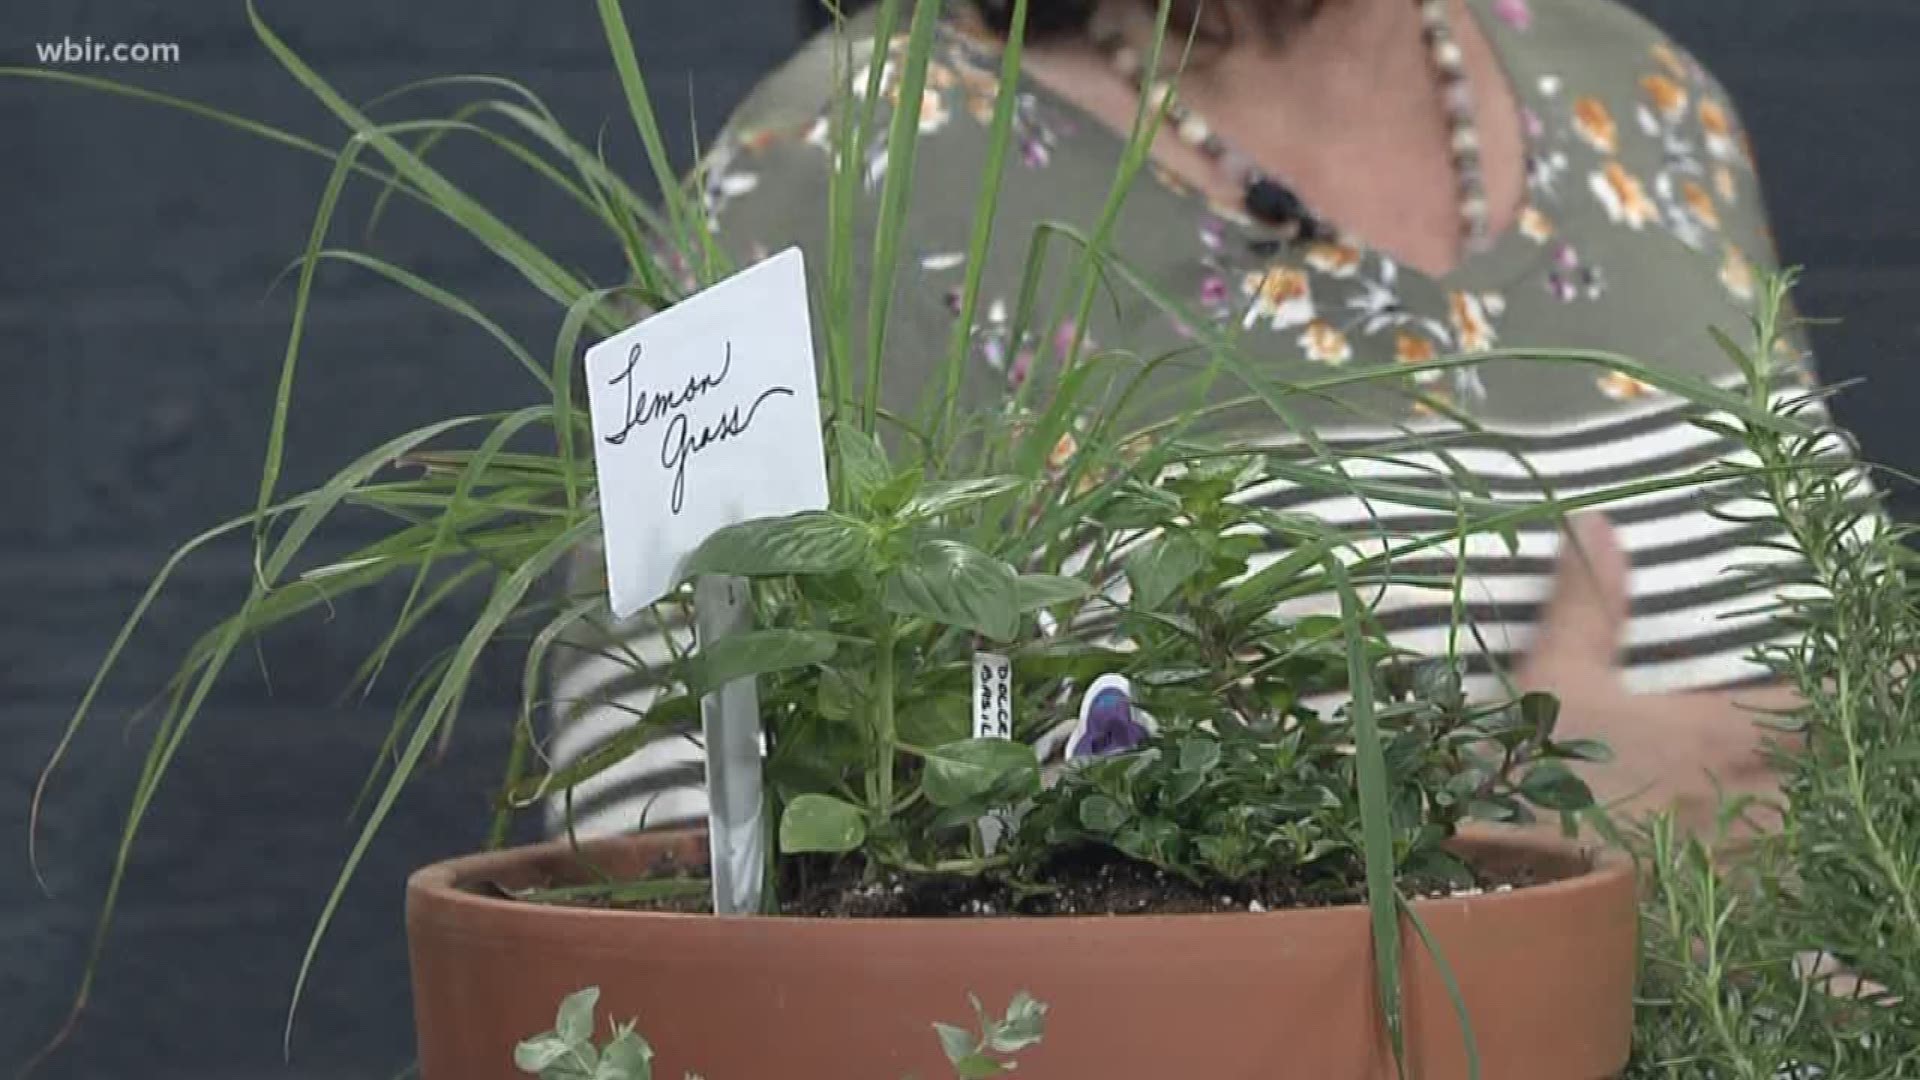 Kathy Mihalczo from Erin's Meadow Herb Farm shows us how to plant lemongrass to repel mosquitoes.